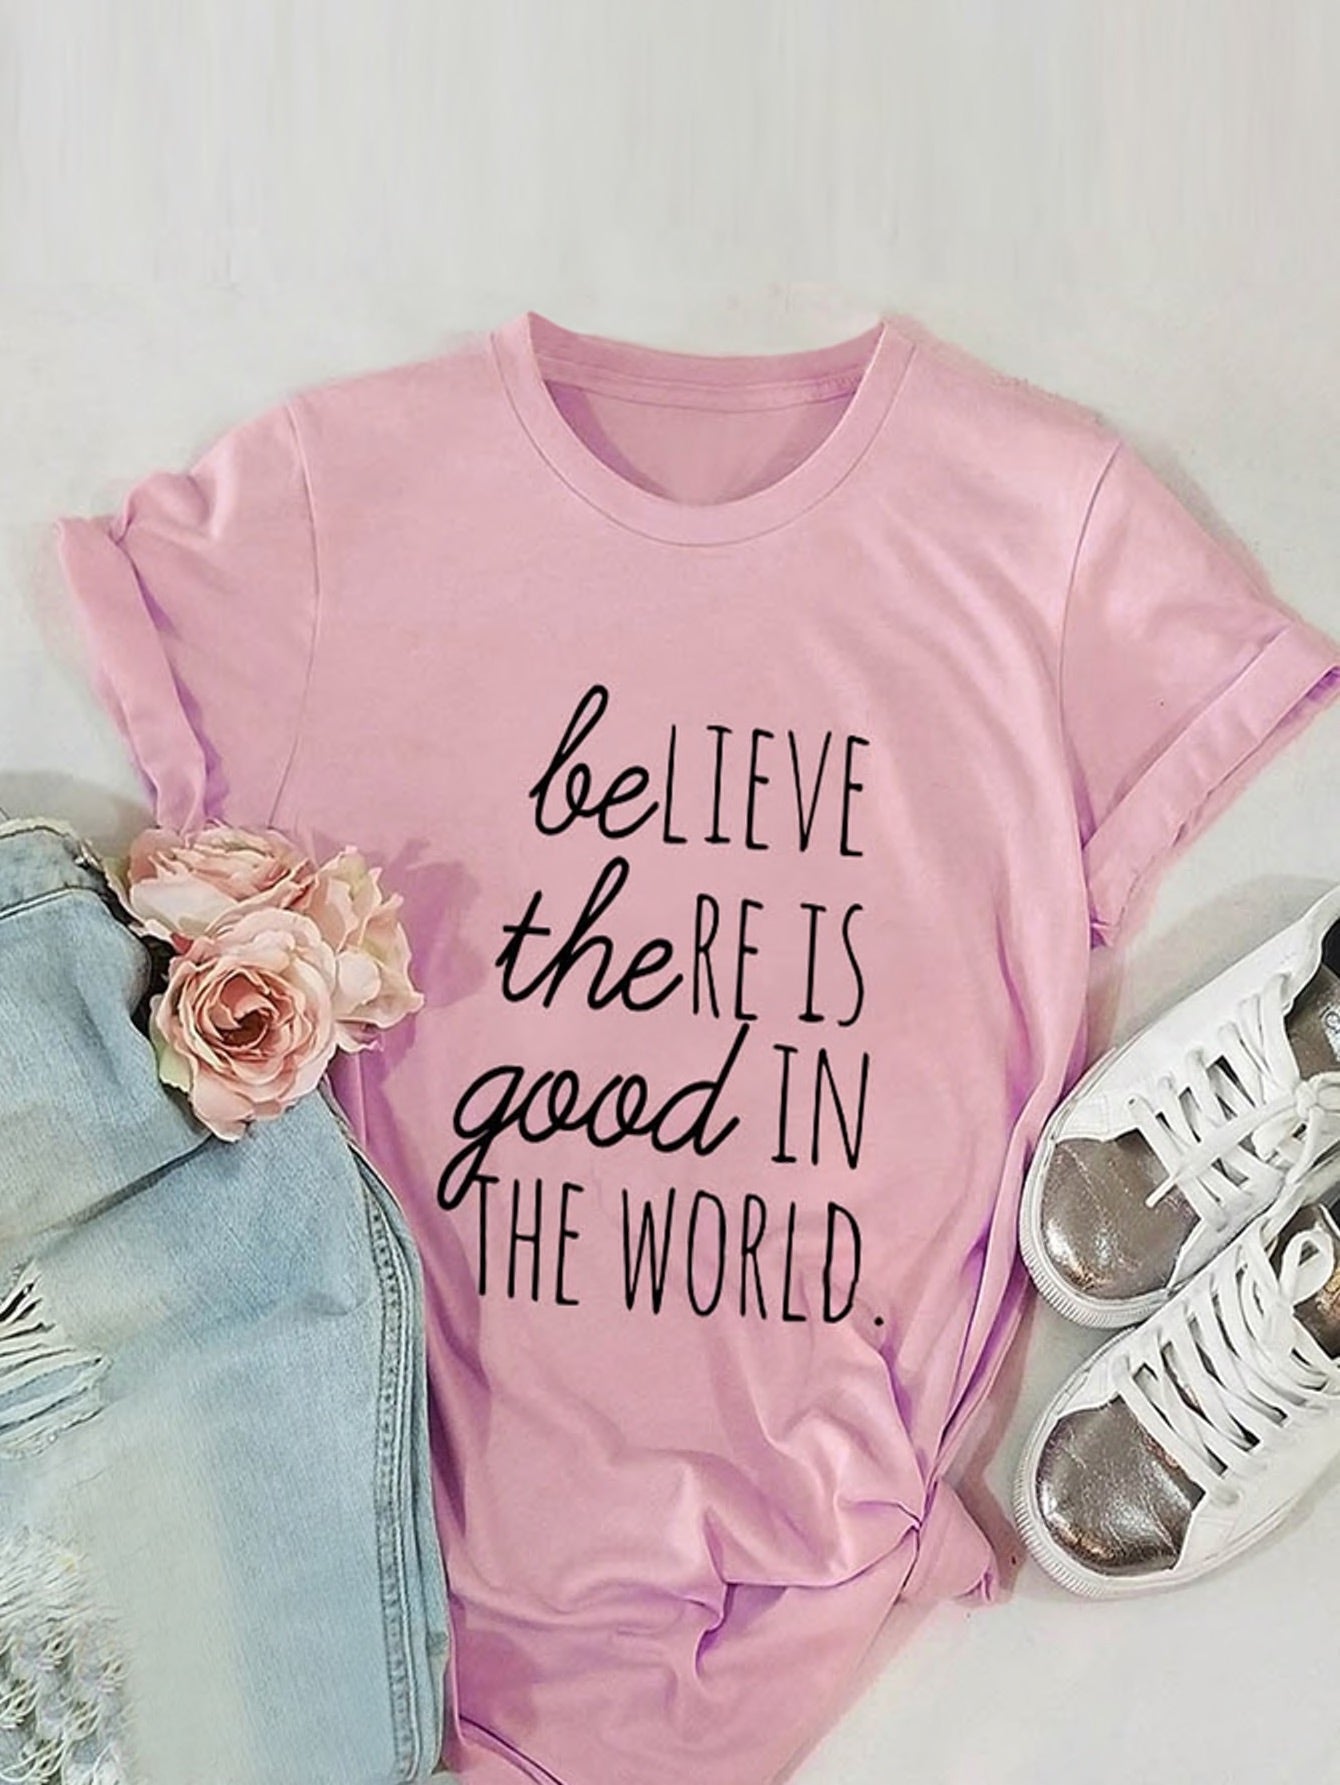 Believe There Is Good T-Shirt